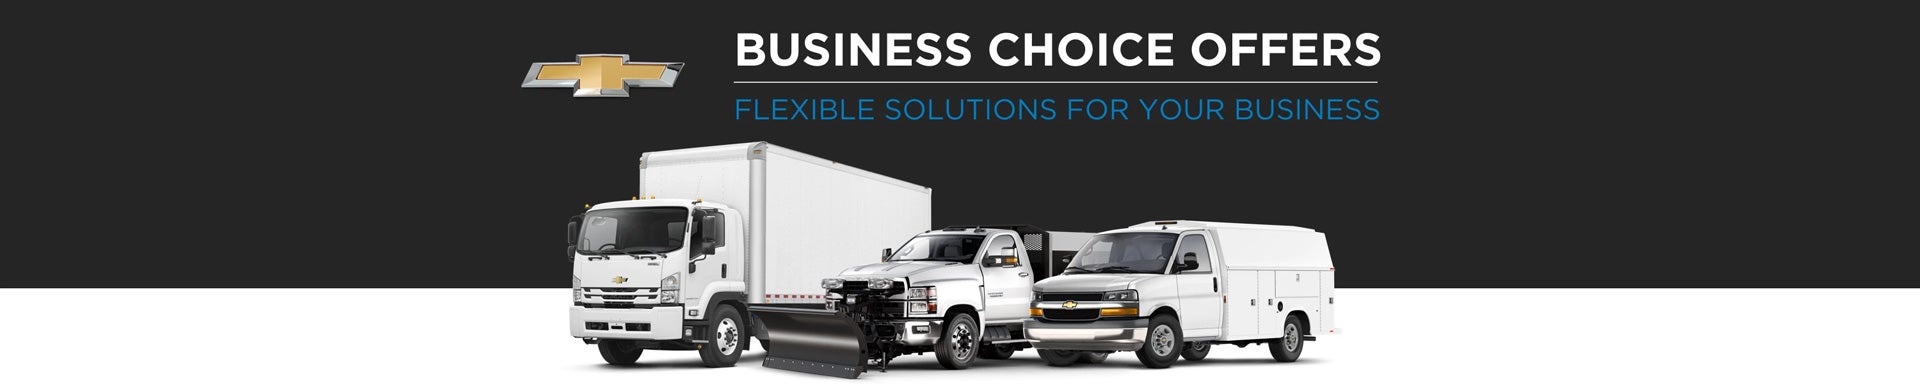 Chevrolet Business Choice Offers - Flexible Solutions for your Business - Lynch Chevrolet GMC of Burlington in Burlington WI